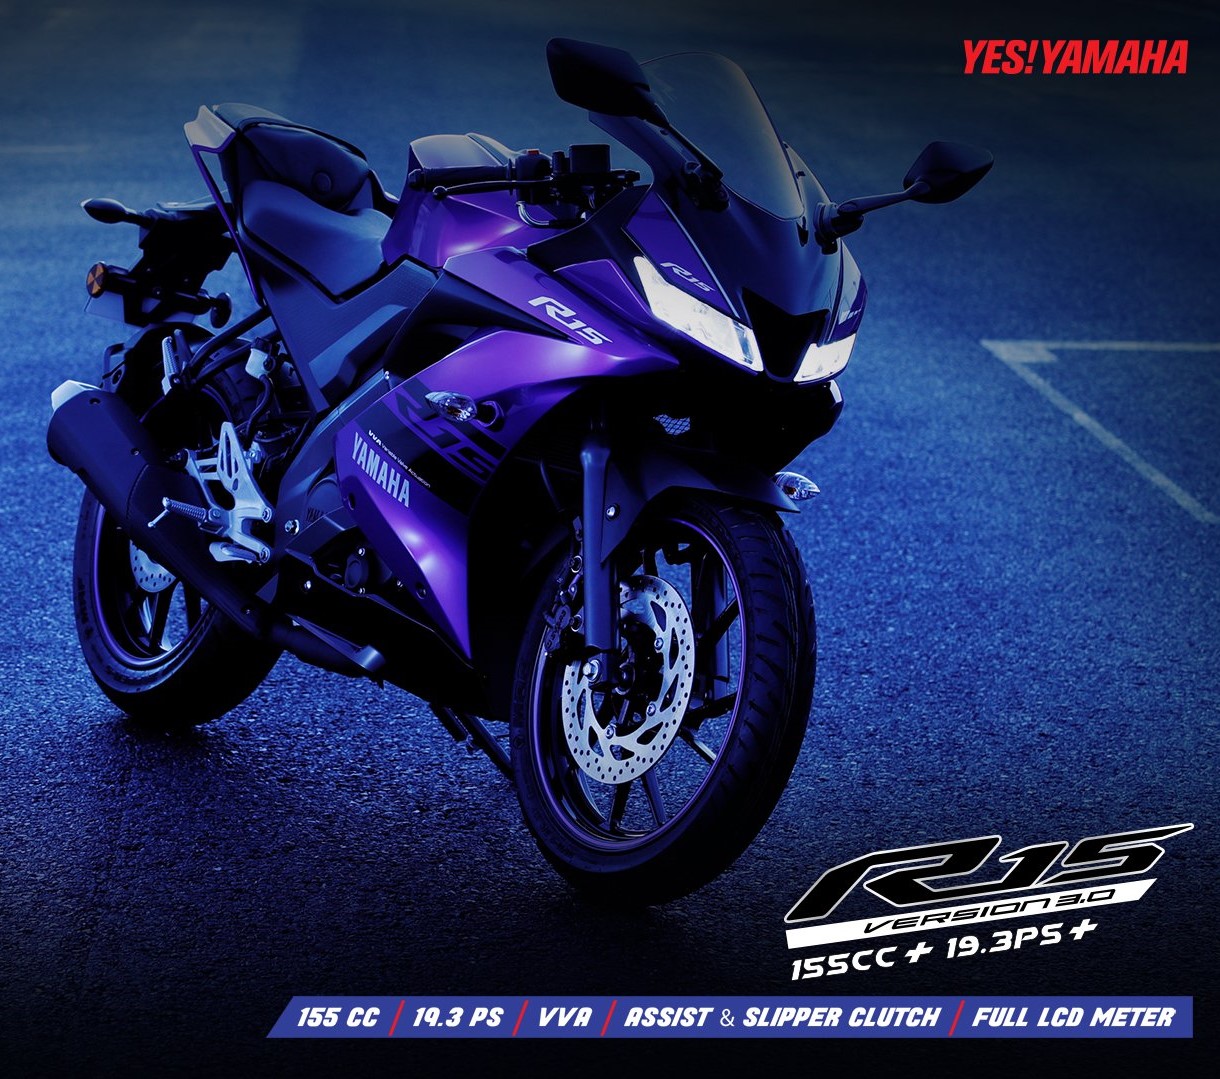 Yamaha R15 Version 3 Launched in Nepal